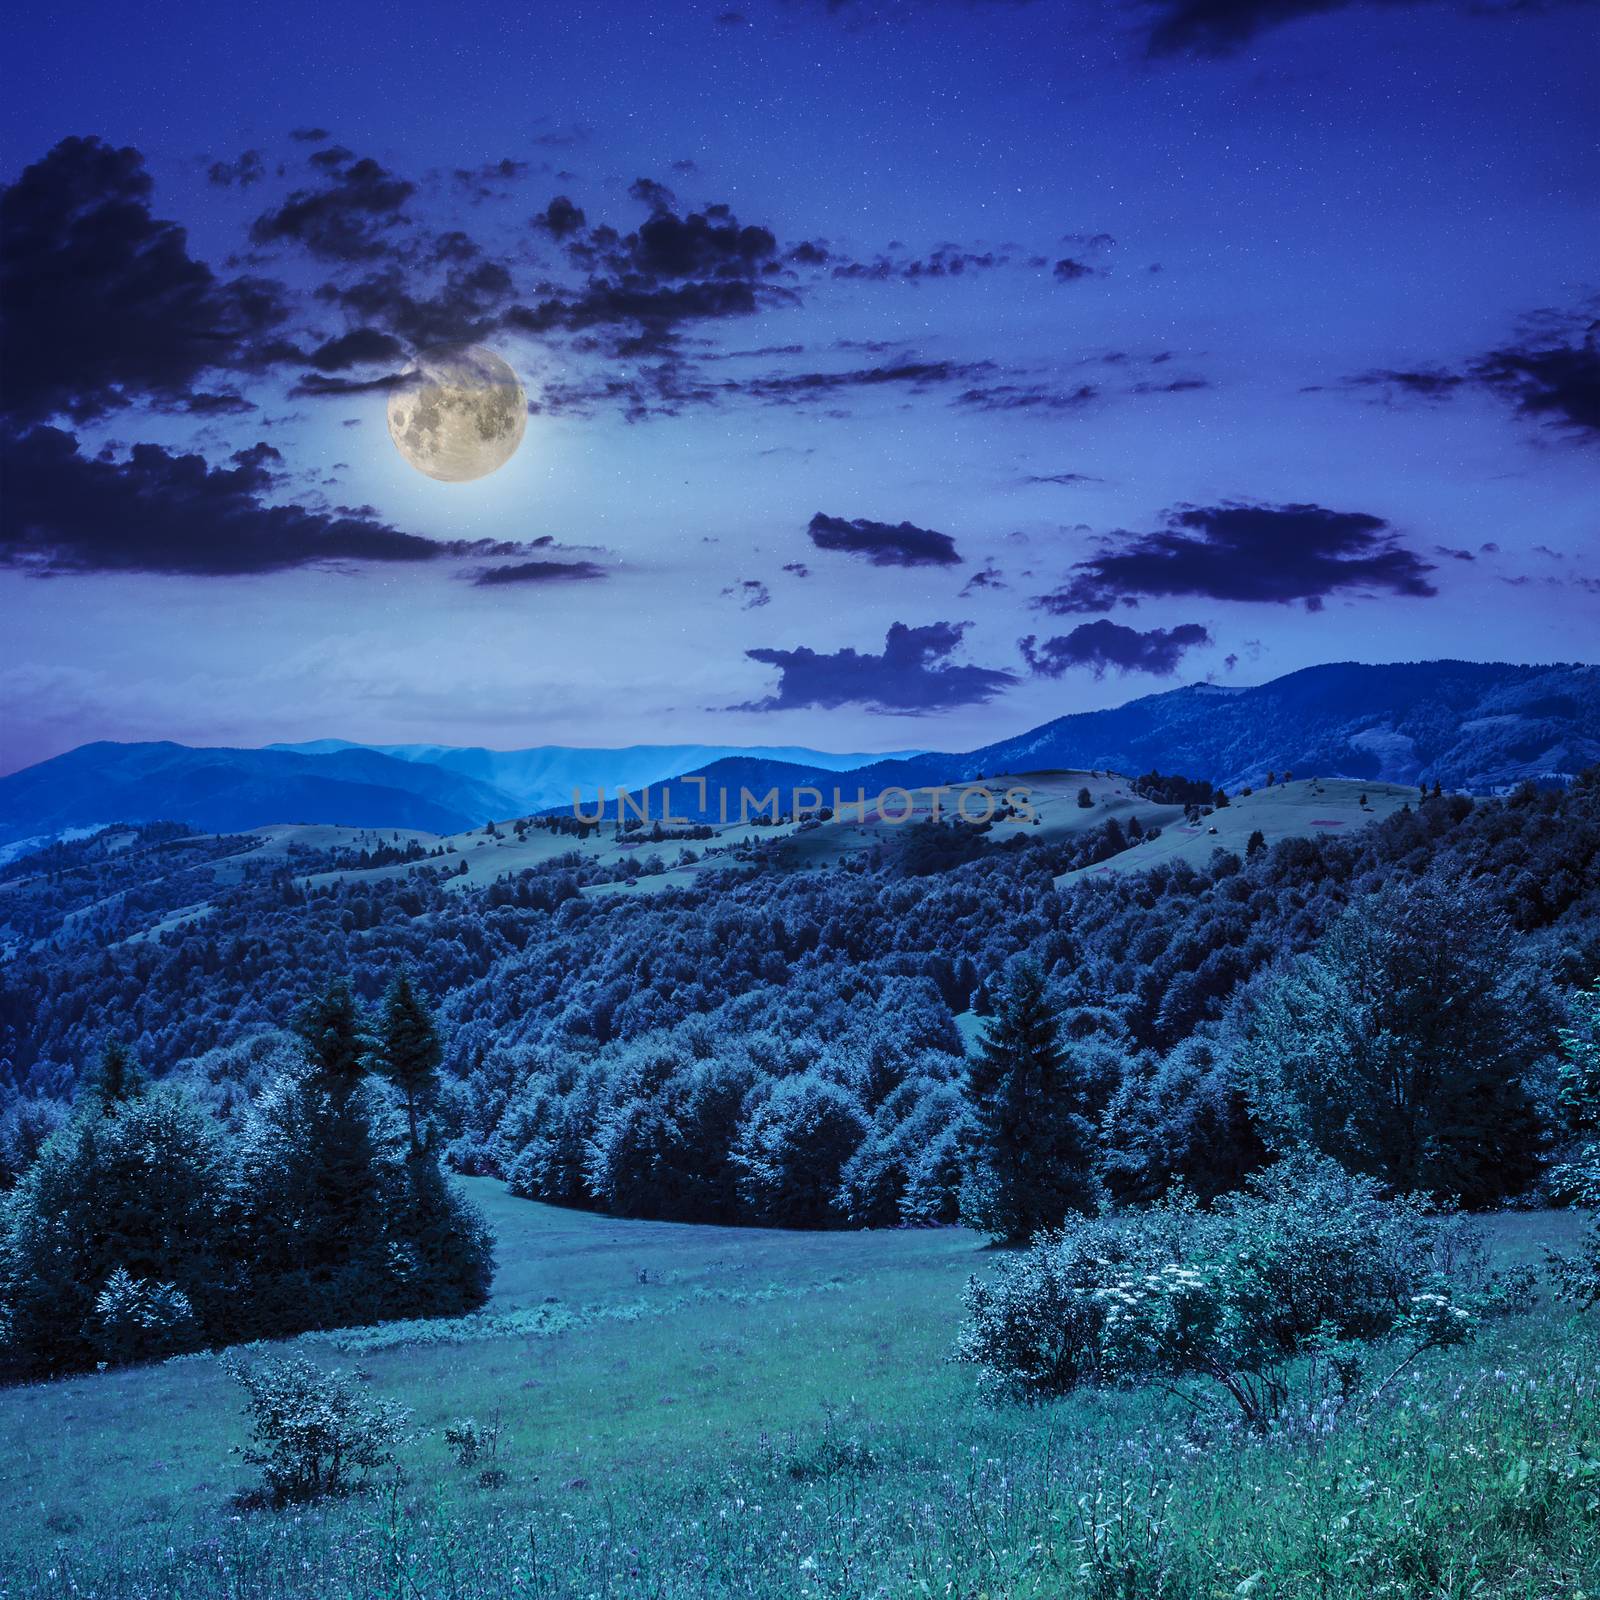  mountain steep slope with coniferous forest in moon light